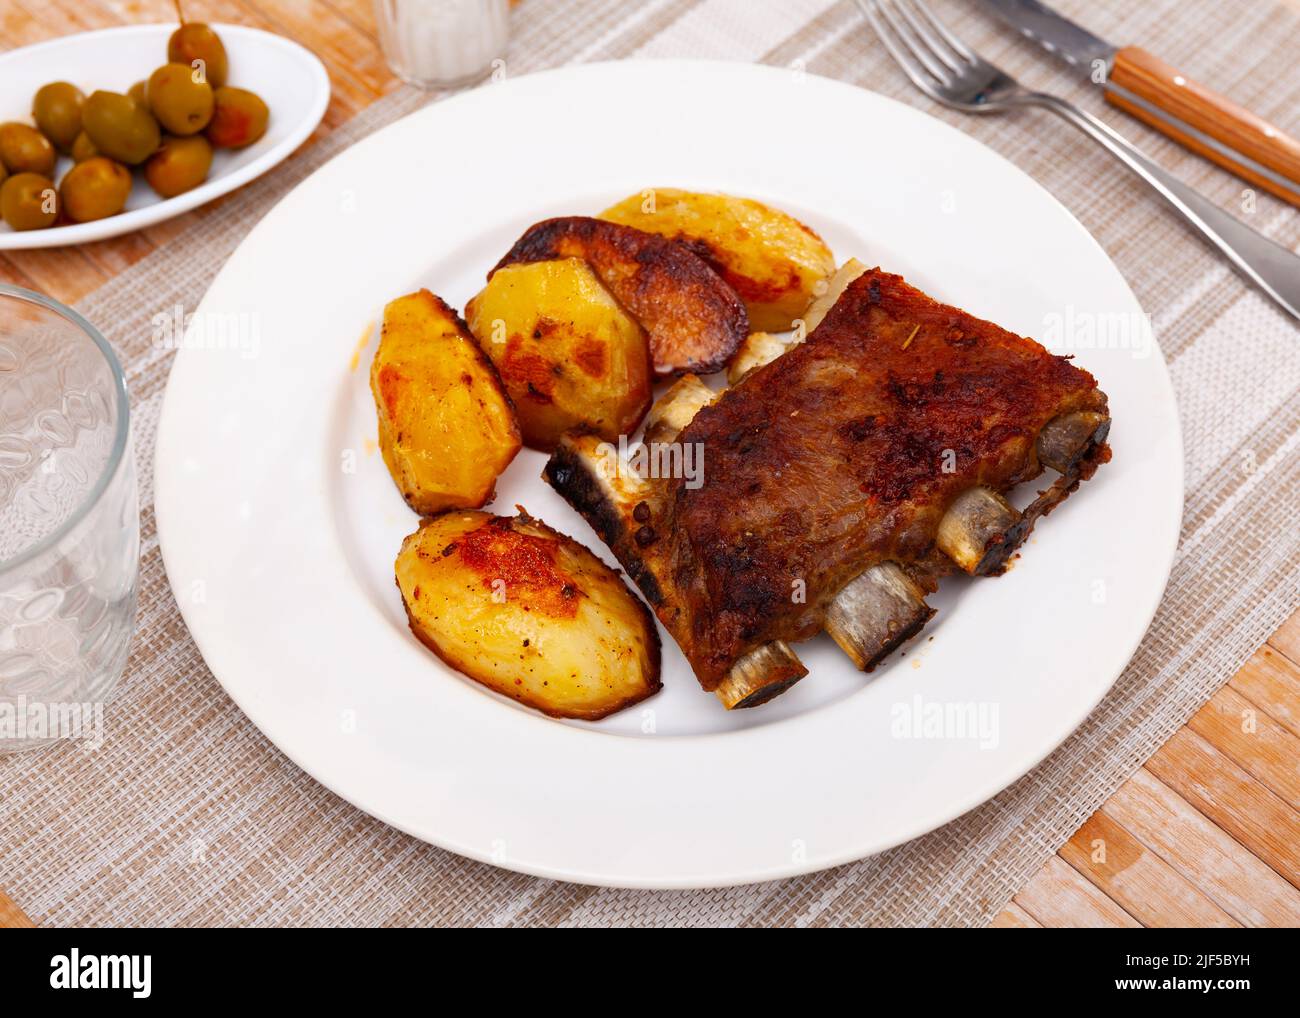 Pork ribs with boiled potatoes and spices on ceramic plate Stock Photo